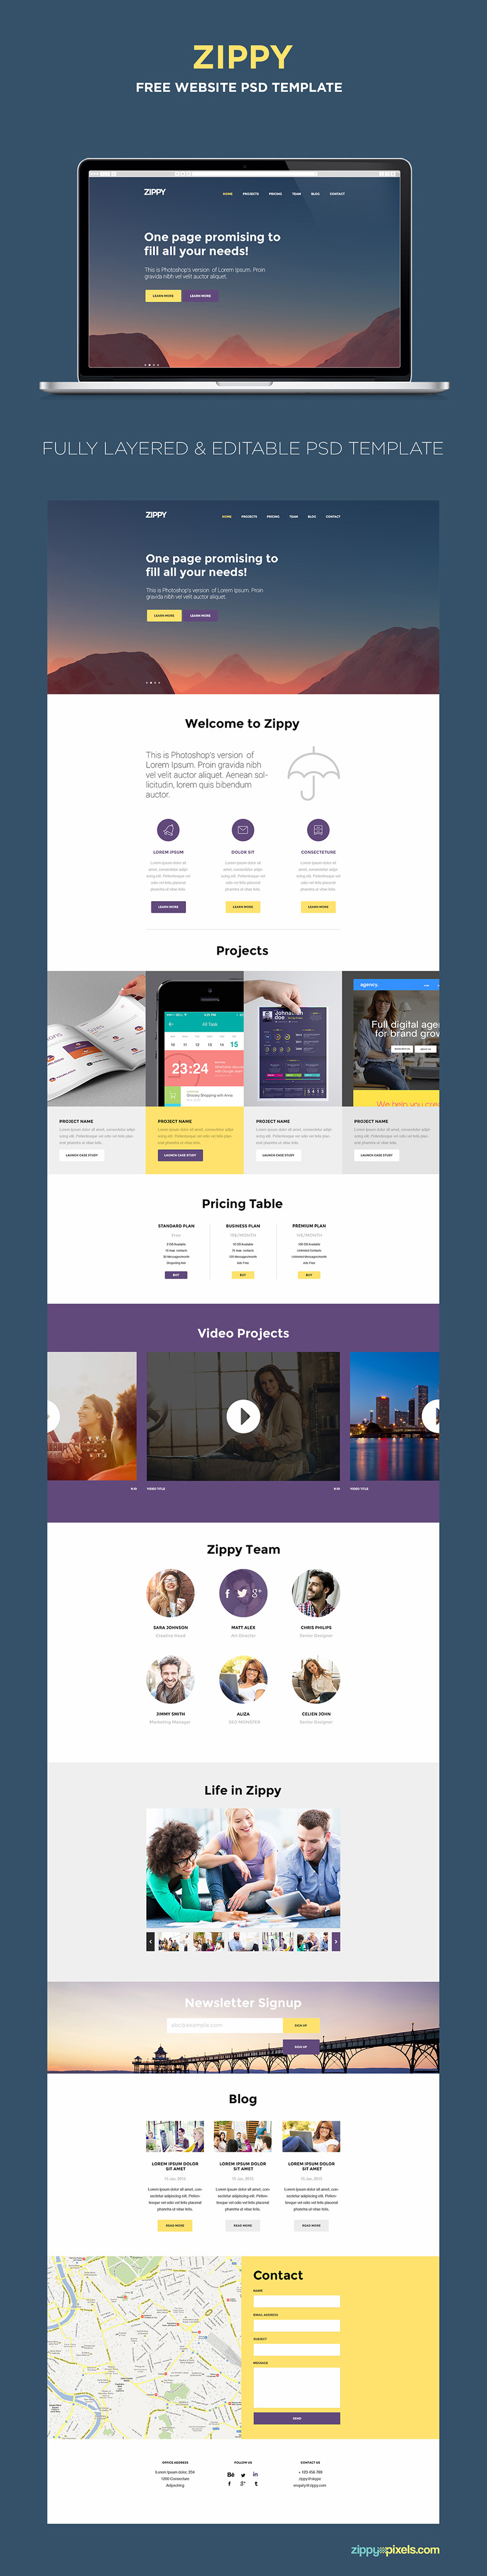 Free One Page Website Template PSD ZippyPixels